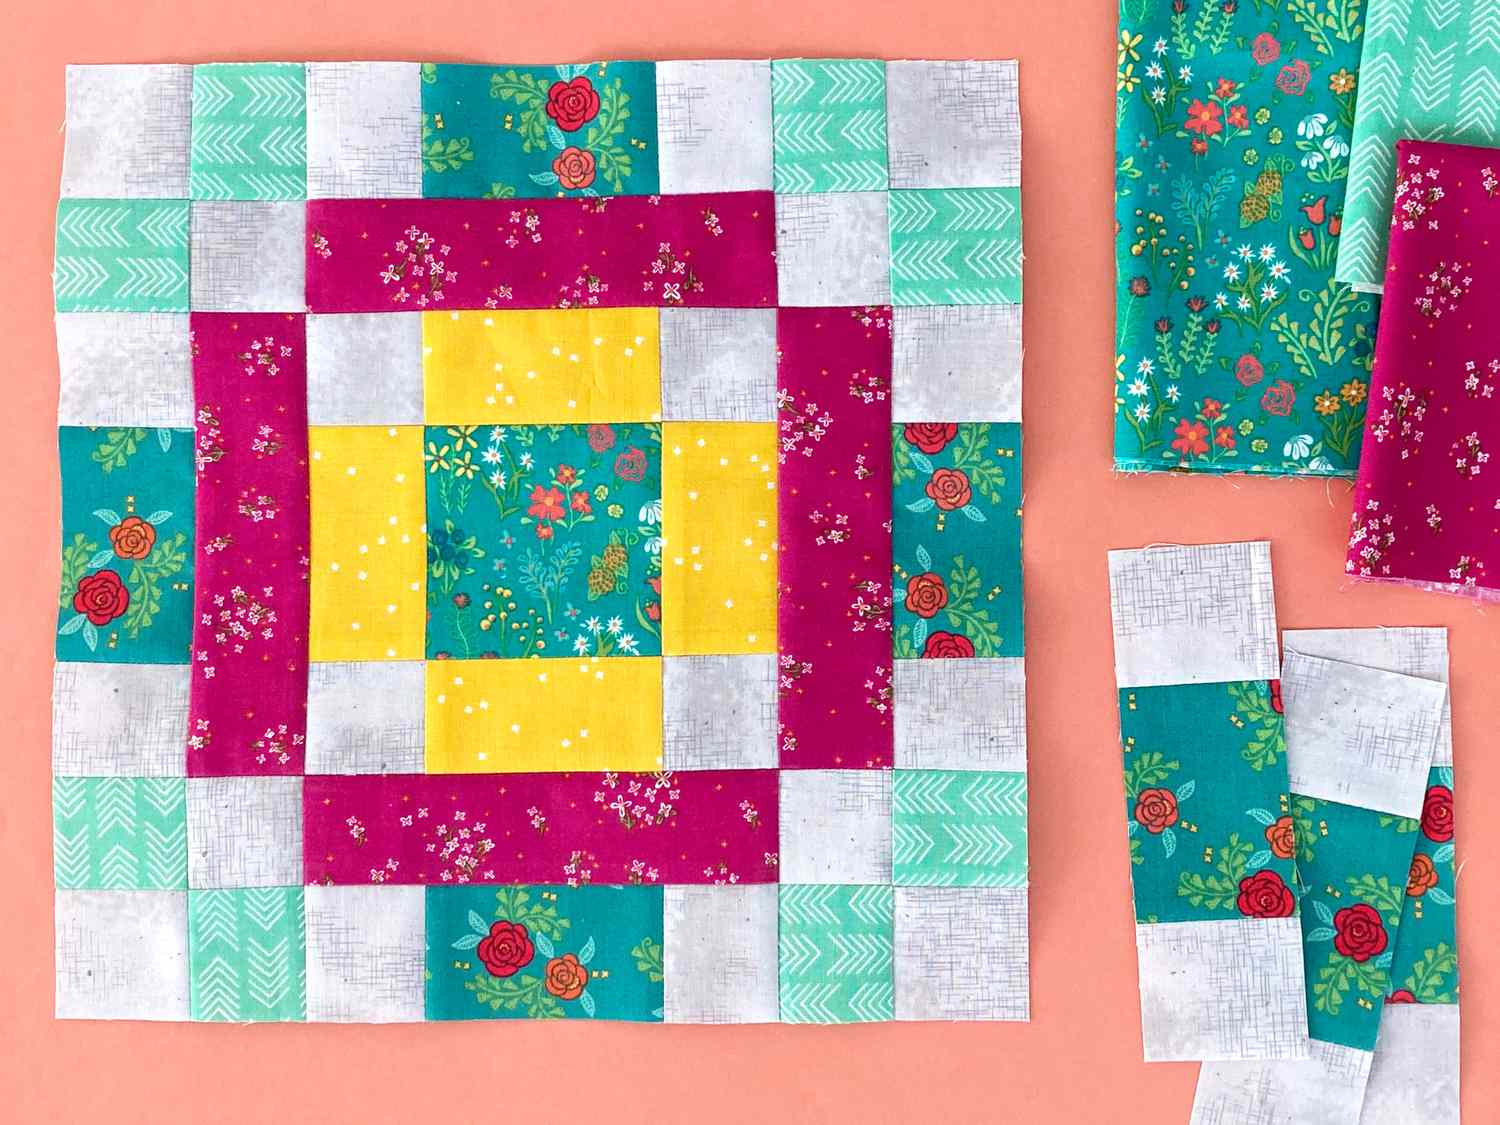 Block 11 made in teal, pink, and yellow florals